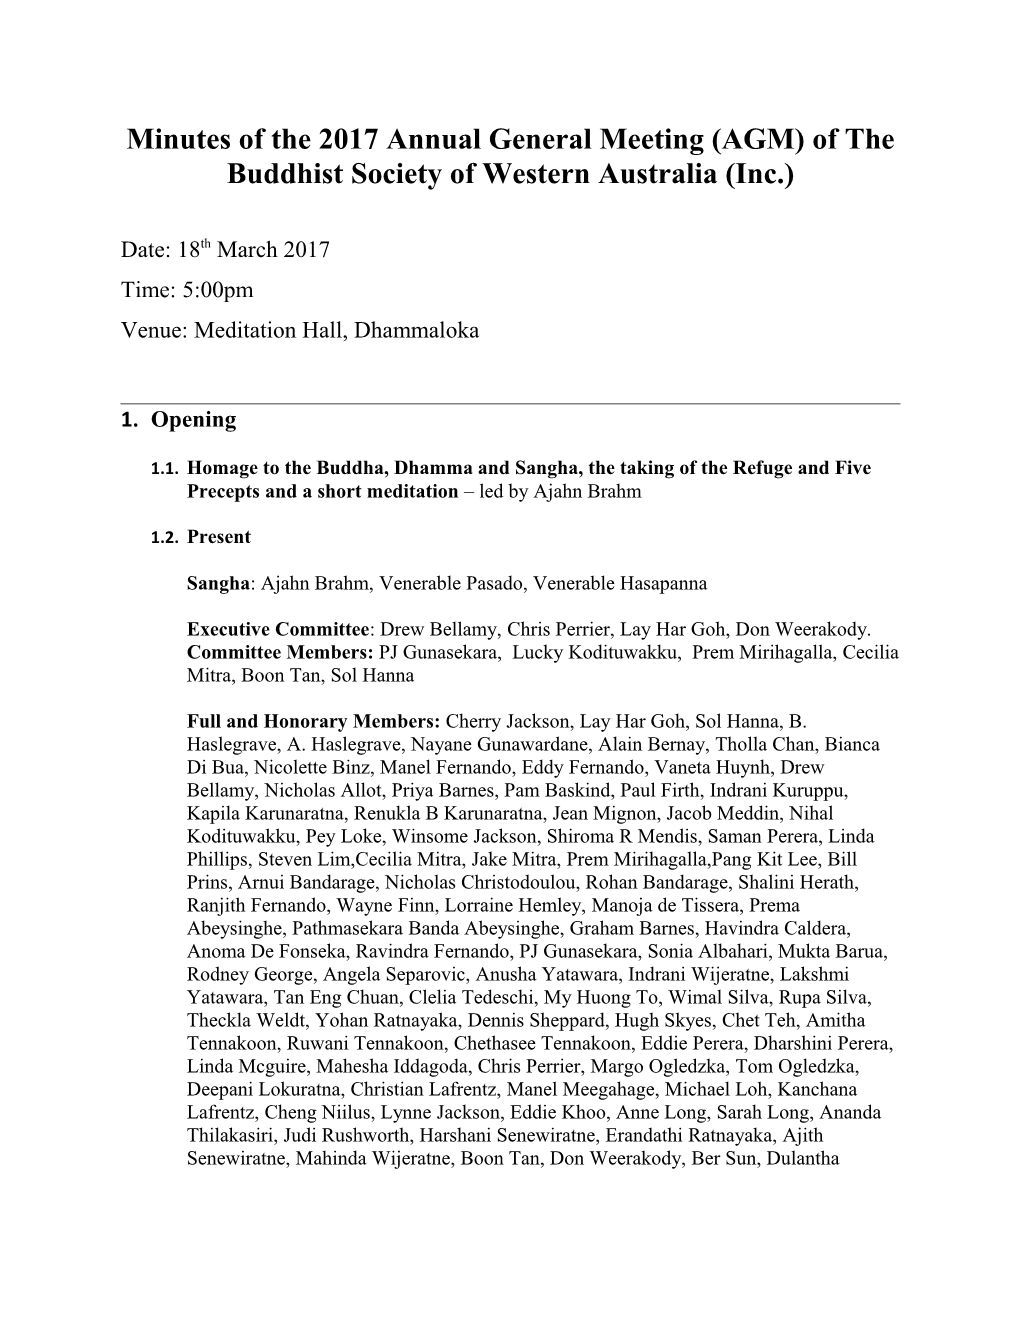 Minutes of the 2017 Annual General Meeting (AGM) of the Buddhist Society of Western Australia